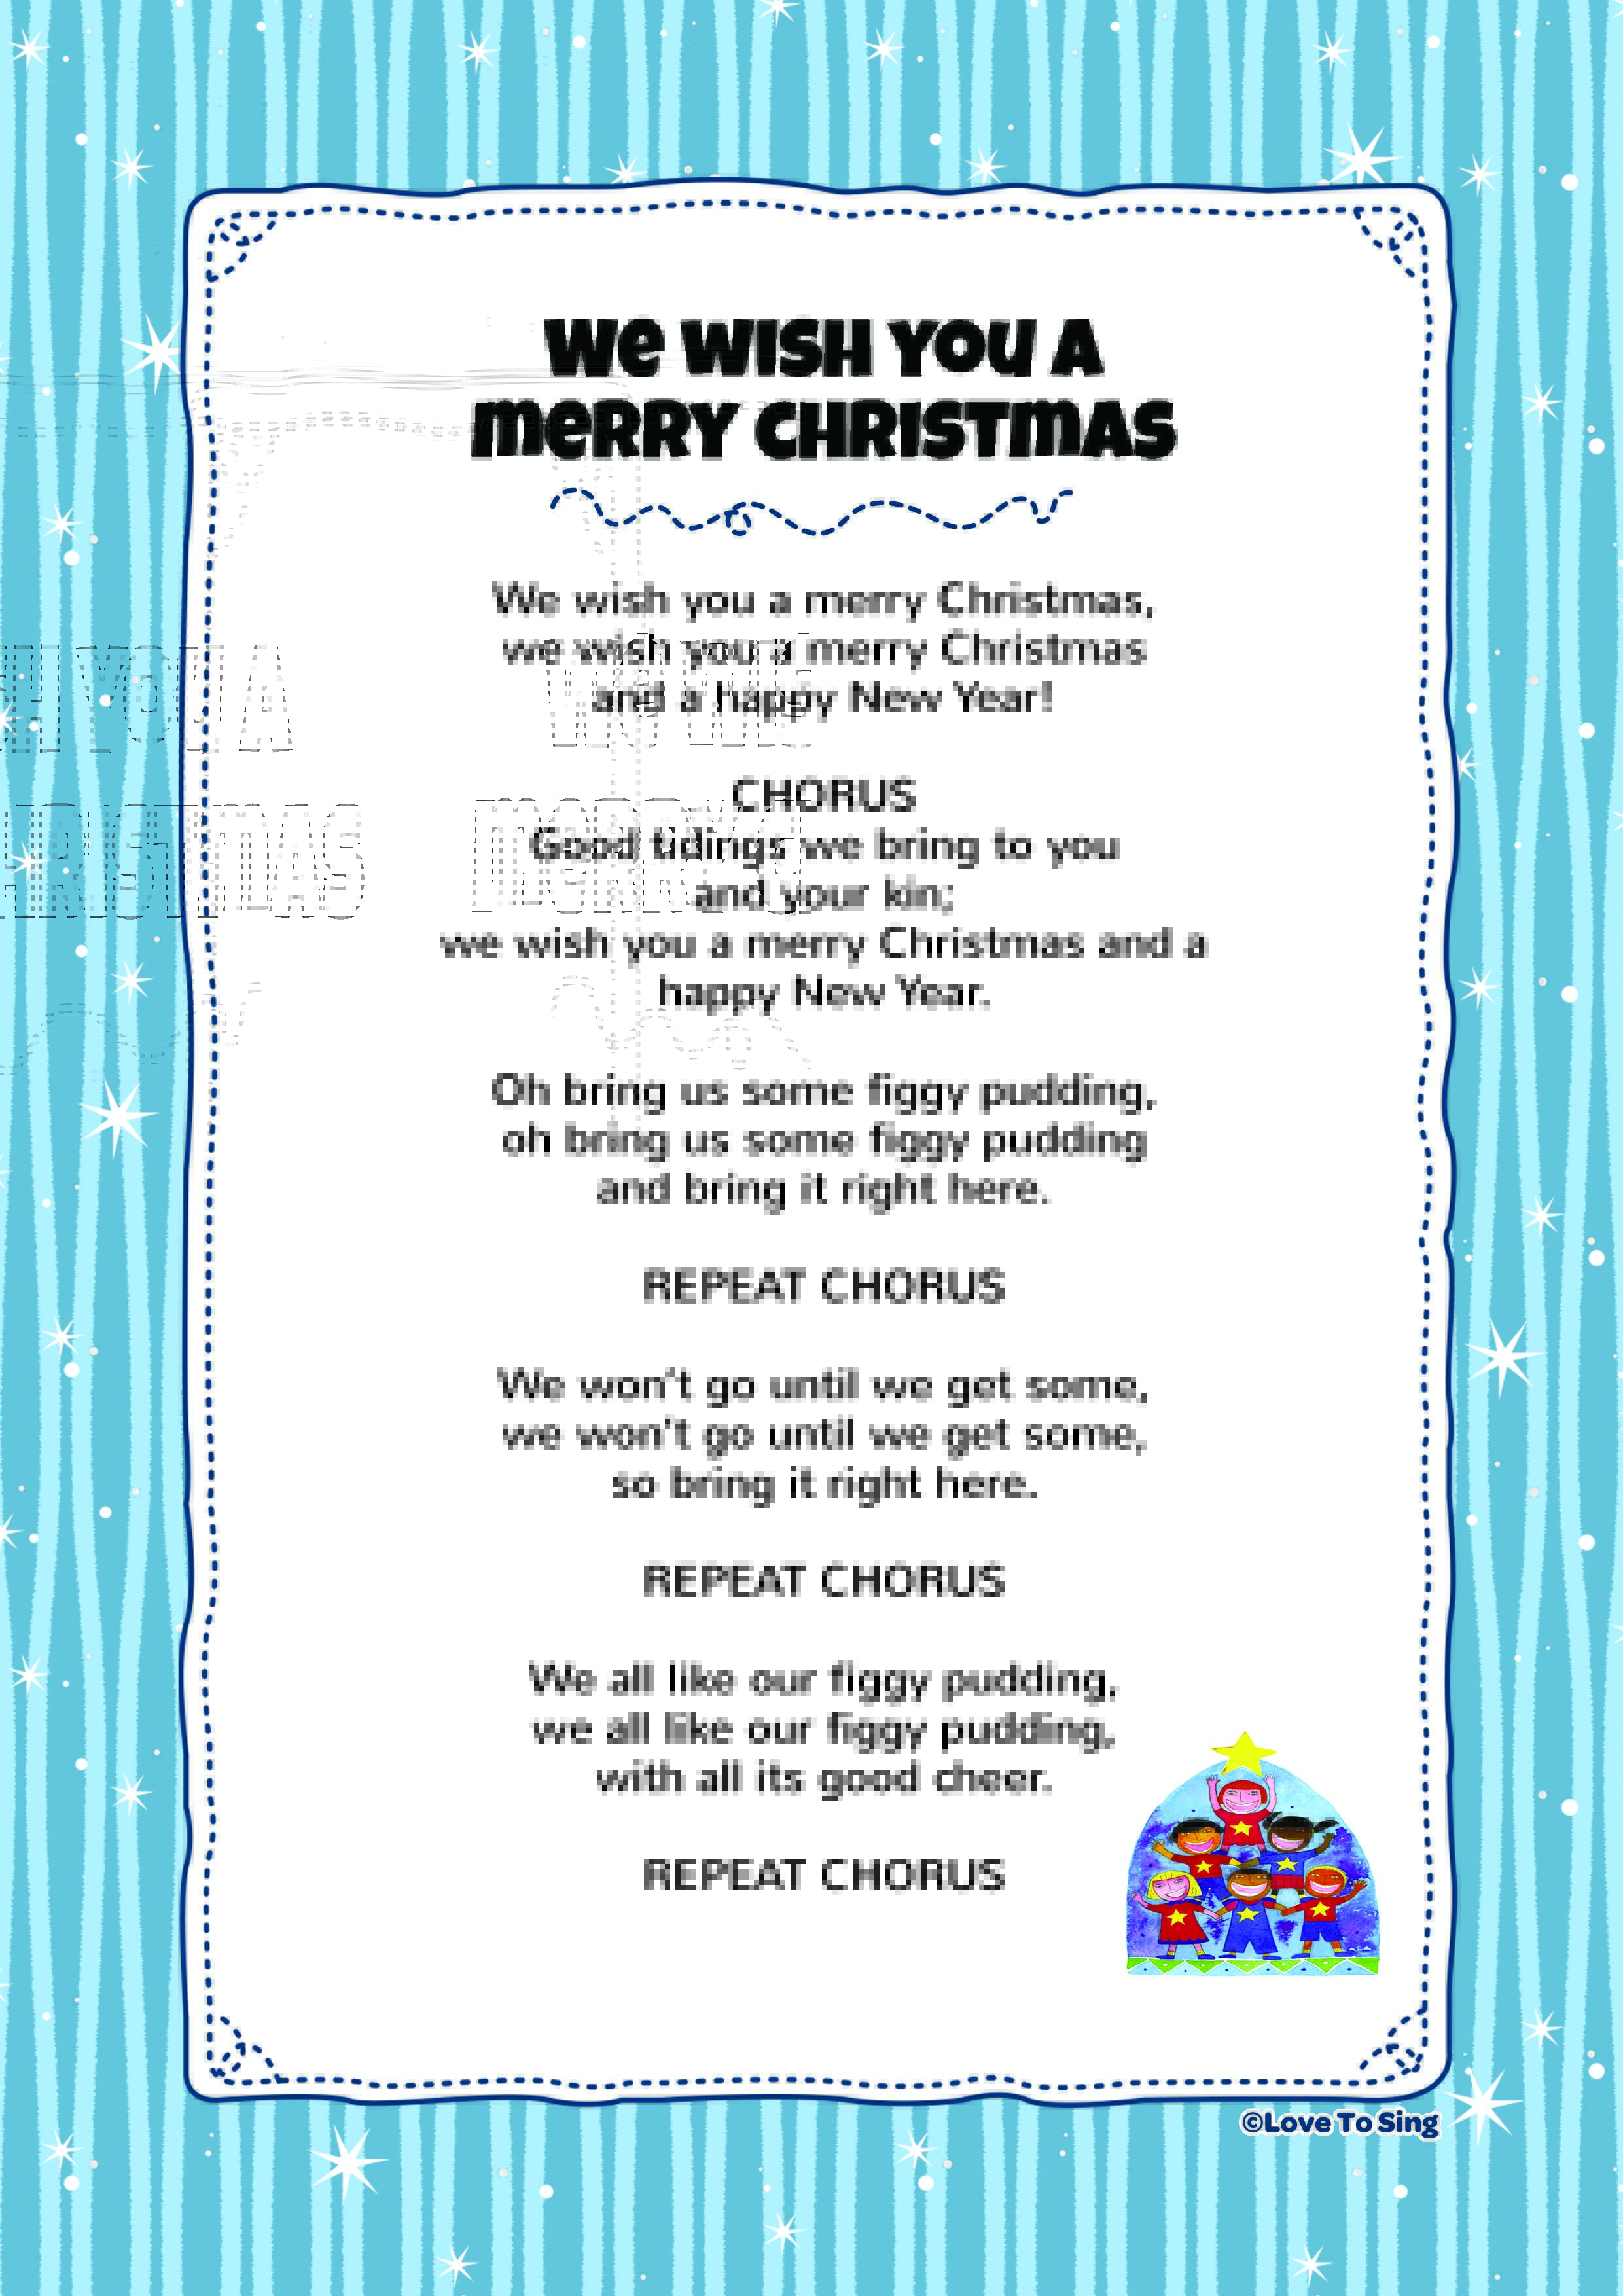 We Wish You A Merry Christmas | Kids Video Song with FREE Lyrics & Activities!